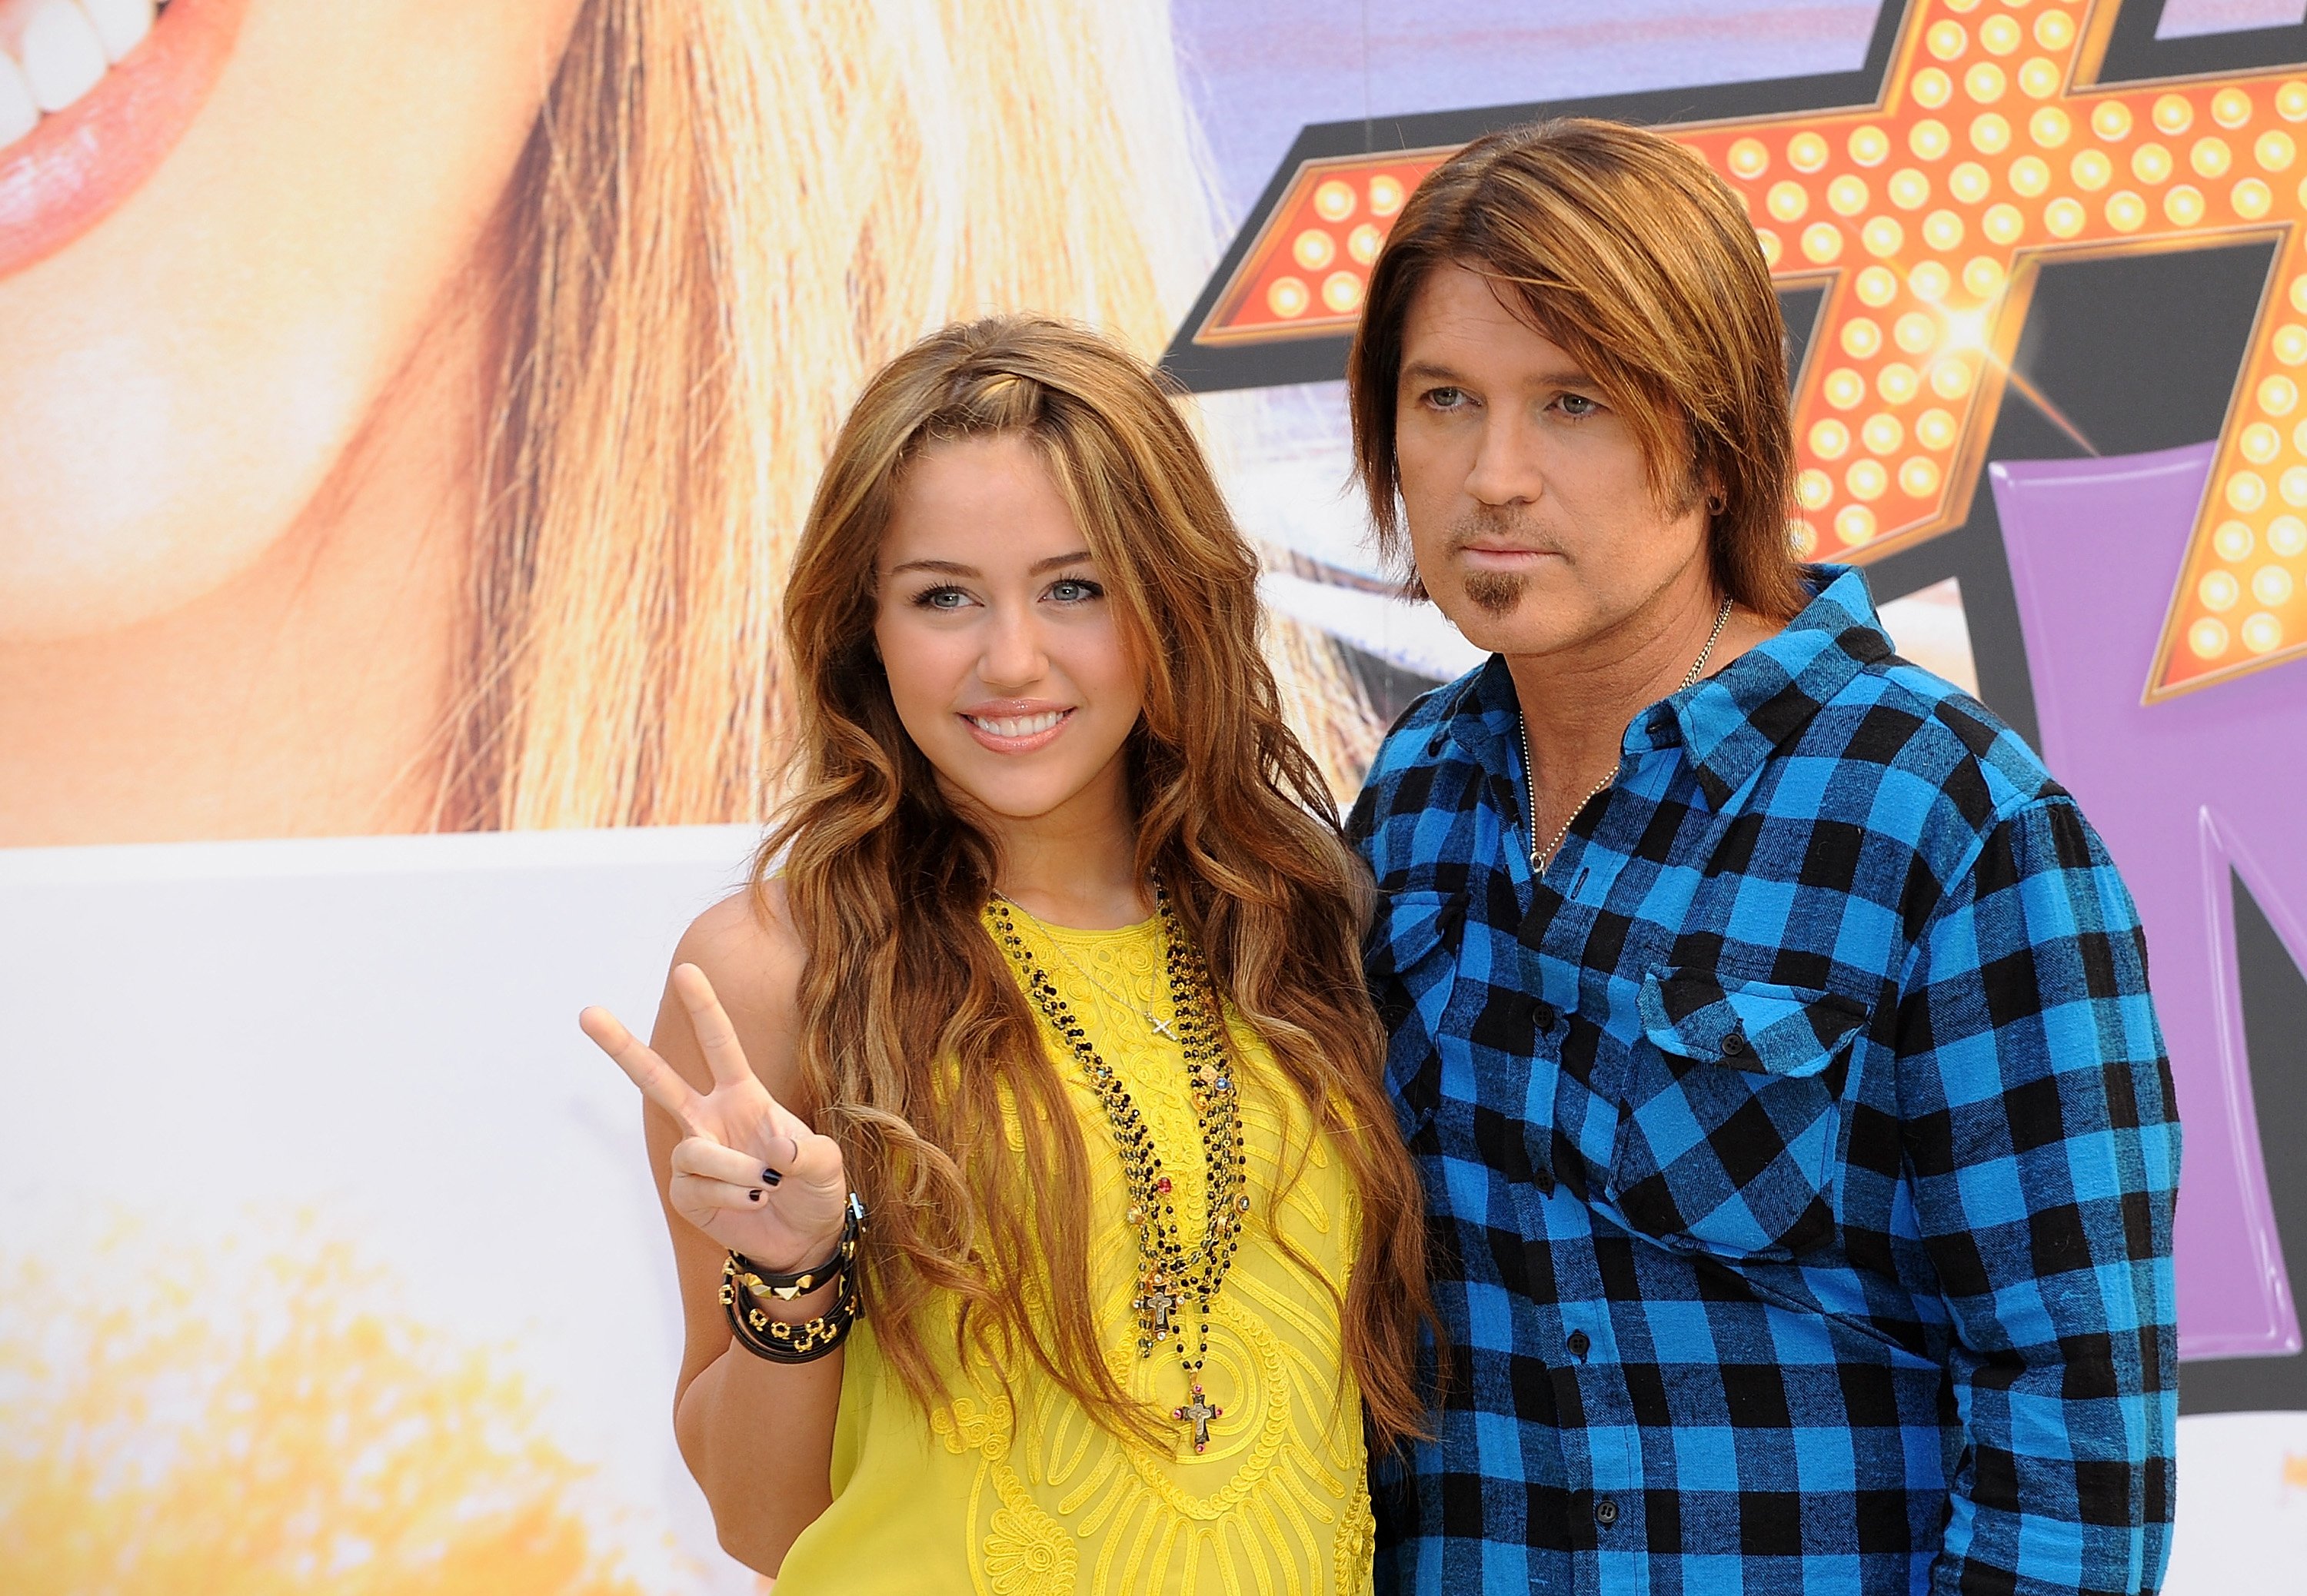 Miley Cyrus and Billy Ray Cyrus in front of a Hannah Montana poster